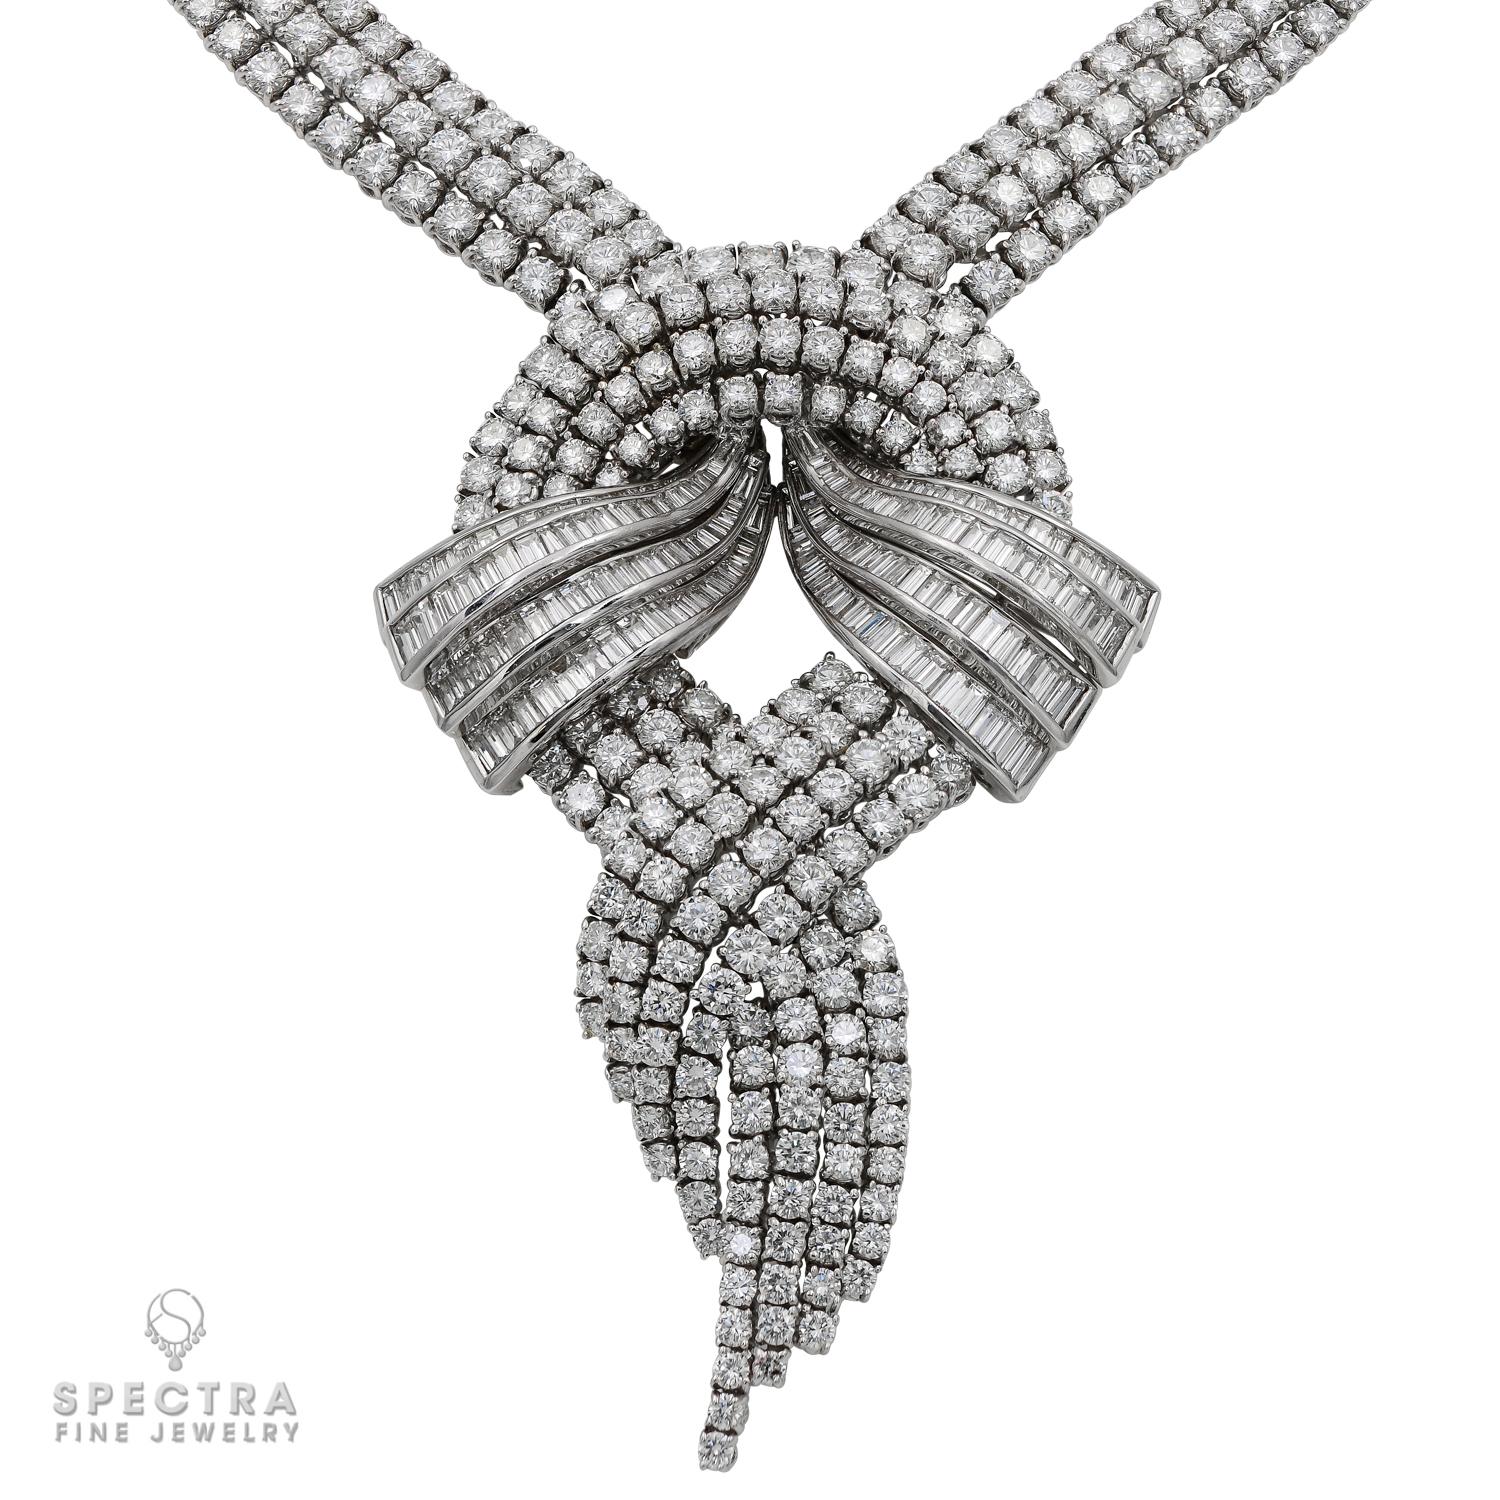 A very beautiful necklace comprising of the round and baguette diamonds, weighing a total of 65 carats.
The diamonds are estimated as E colors, VVS-VS clarity. 
The setting is made of 18k white gold, gross weight 128.79 gr.
The full length of